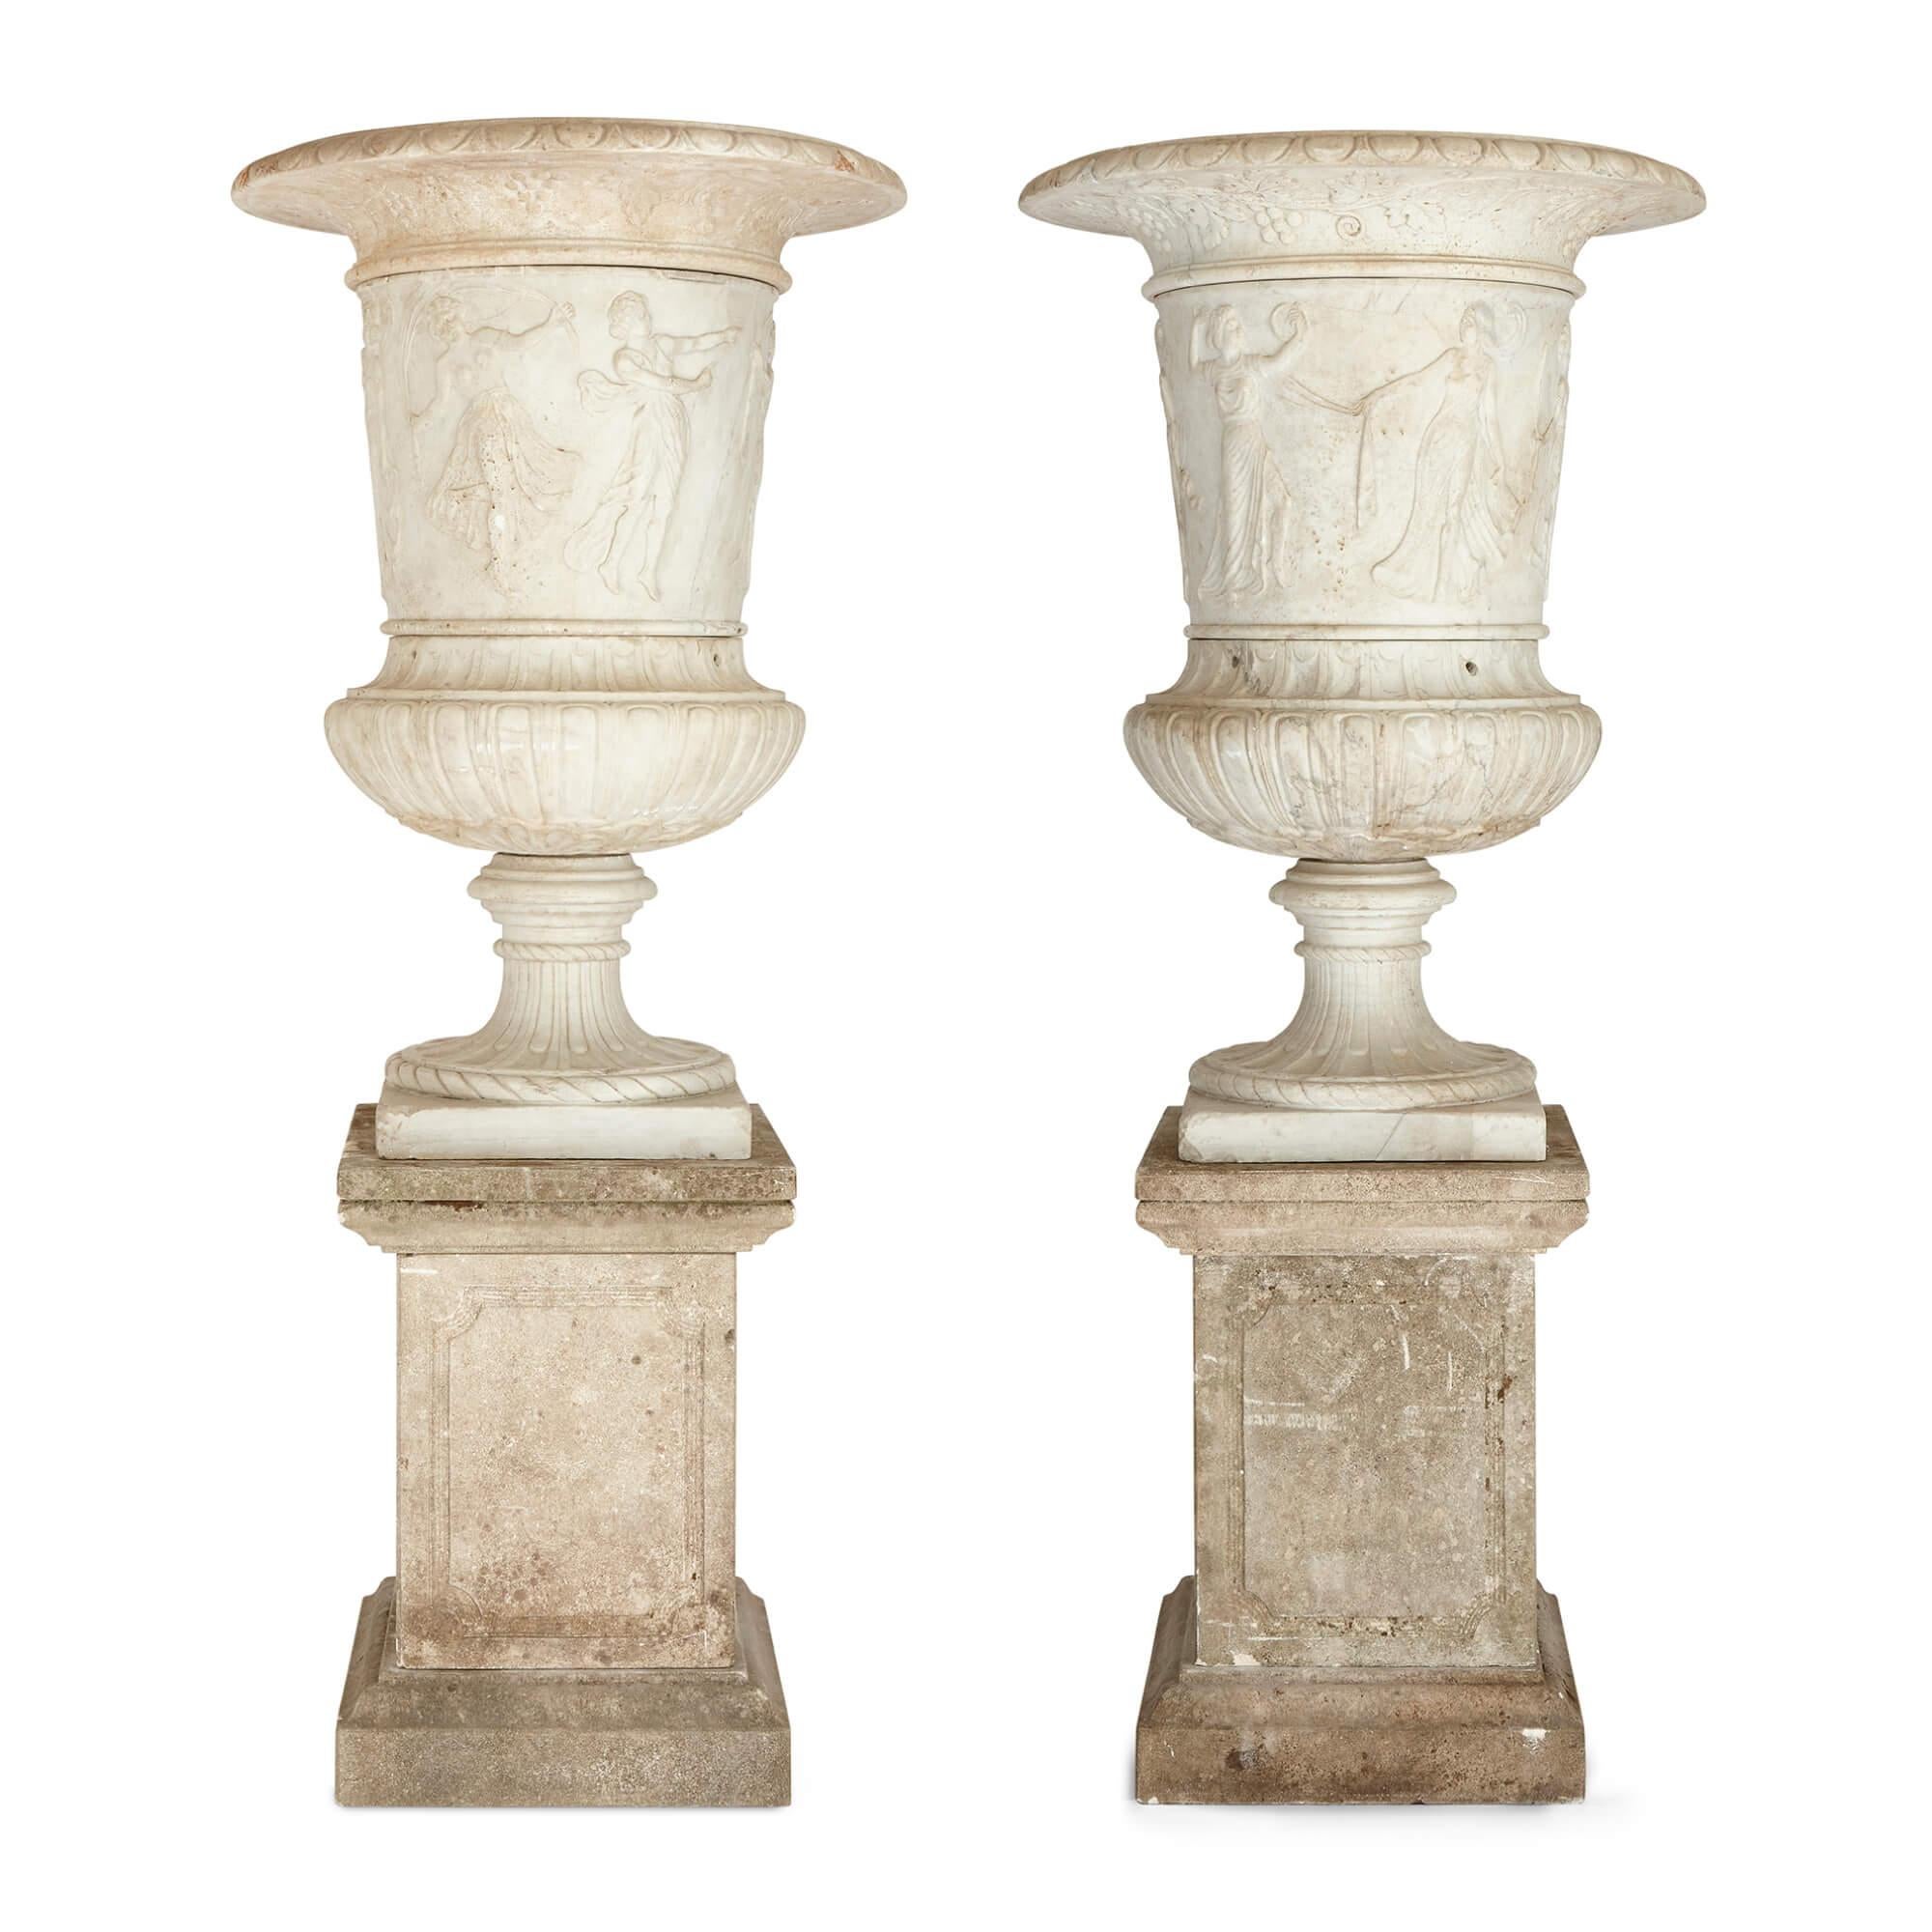 Pair of large, very fine carved marble garden urns of campana form with plinths
Continental, late 19th/early 20th century
Vases: height 100cm, diameter 69cm
Bases: height 62cm, width 44cm, depth 44cm

Monumental in scale and beautifully carved